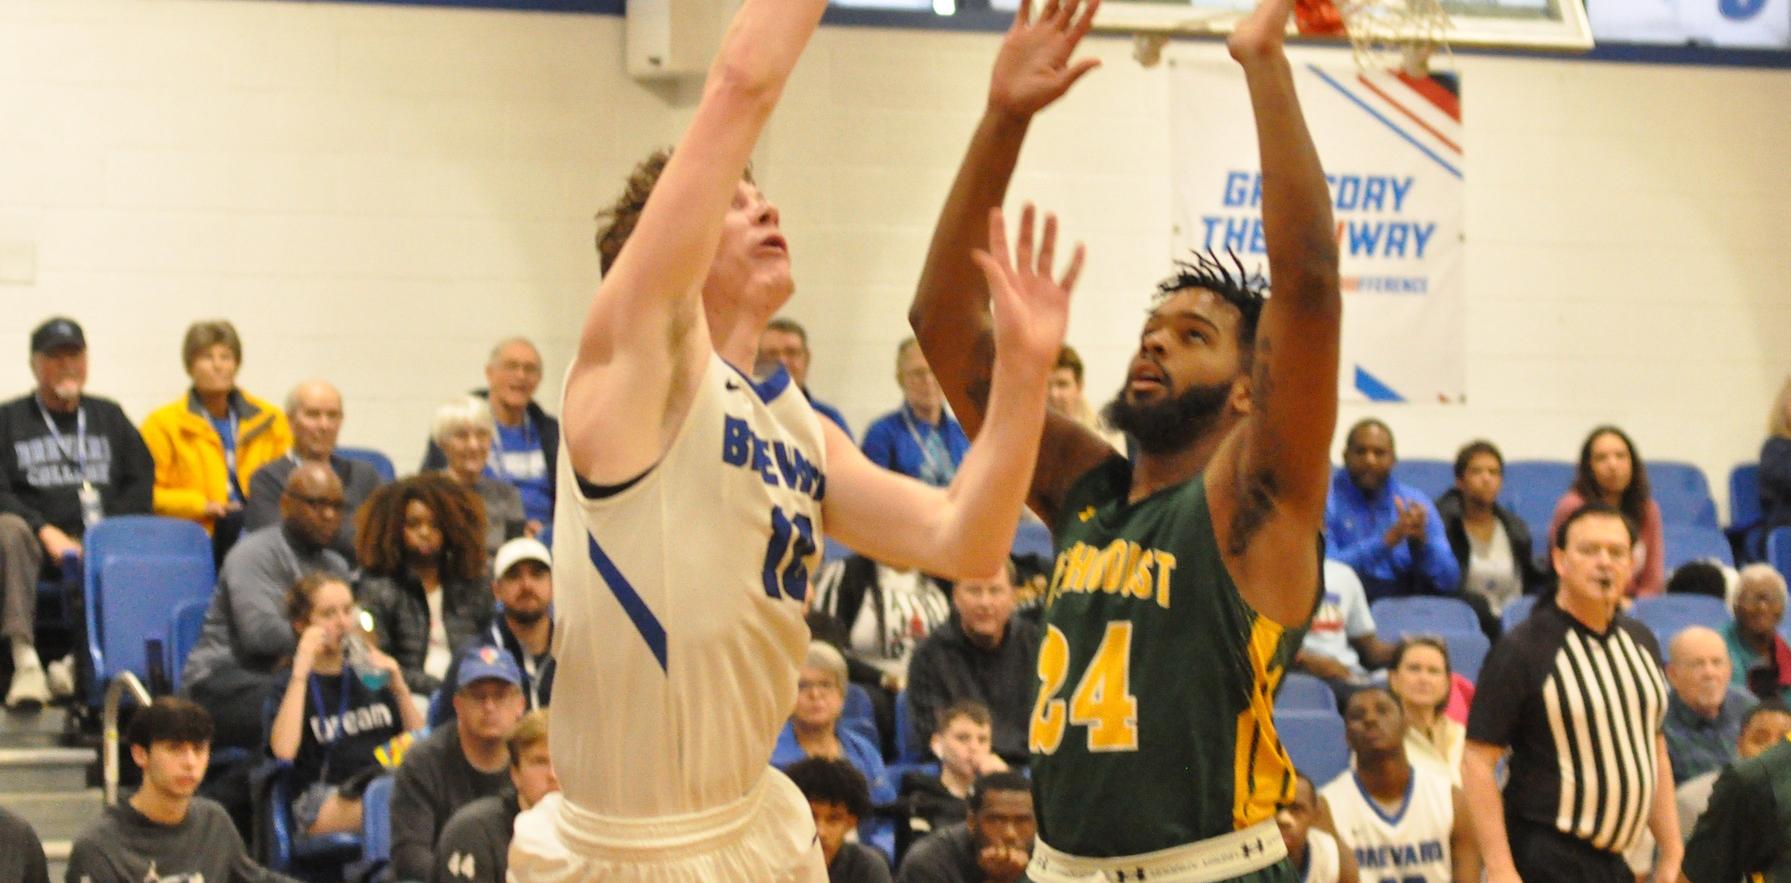 Junior forward Cannon Lamb poured in a career-best 27 points as Brevard battled Methodist at The Bosh on Saturday (Photo courtesy of Tommy Moss).